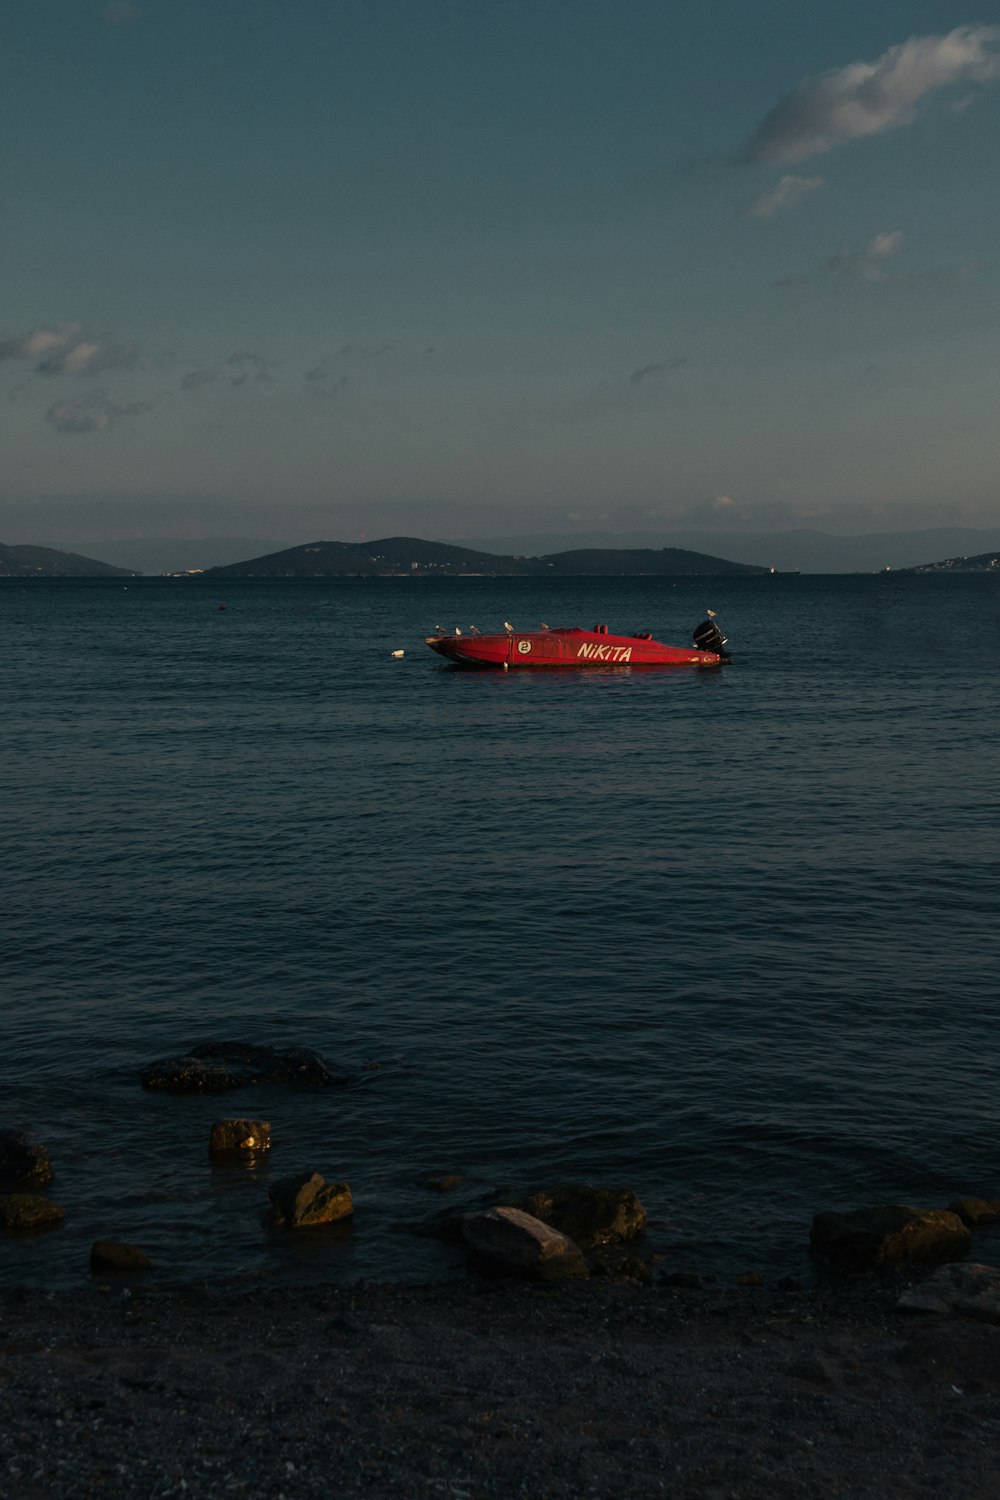 red boat on body of water during daytime